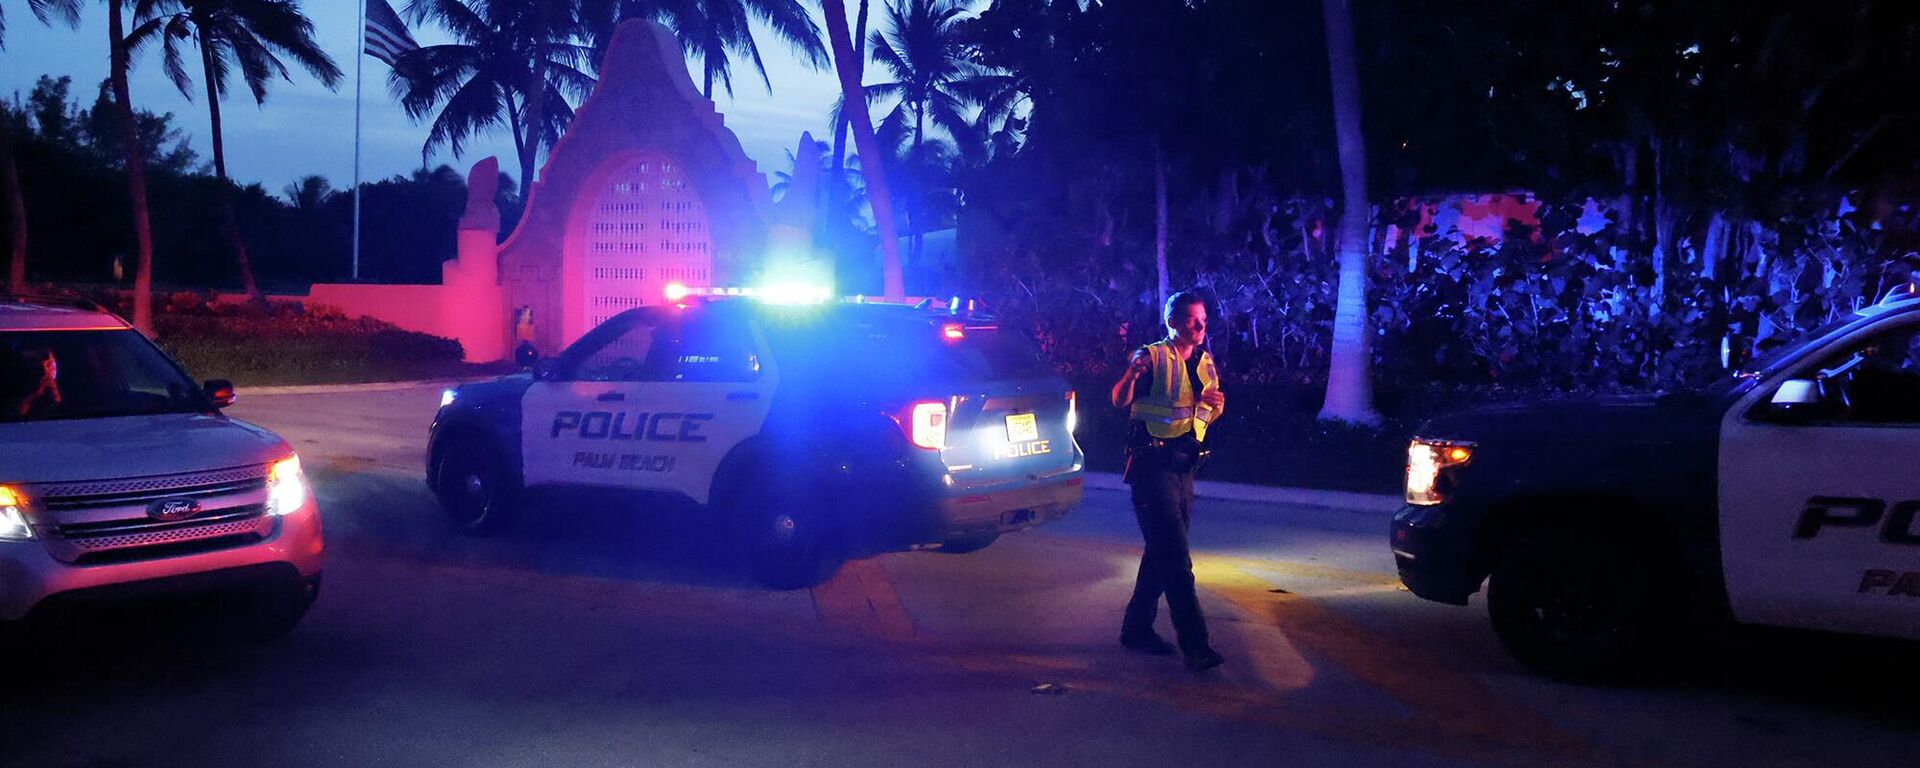 Police direct traffic outside an entrance to former President Donald Trump's Mar-a-Lago estate, Monday, Aug. 8, 2022, in Palm Beach, Fla. Trump said in a lengthy statement that the FBI was conducting a search of his Mar-a-Lago estate and asserted that agents had broken open a safe. (AP Photo/Terry Renna) - Sputnik International, 1920, 12.08.2022